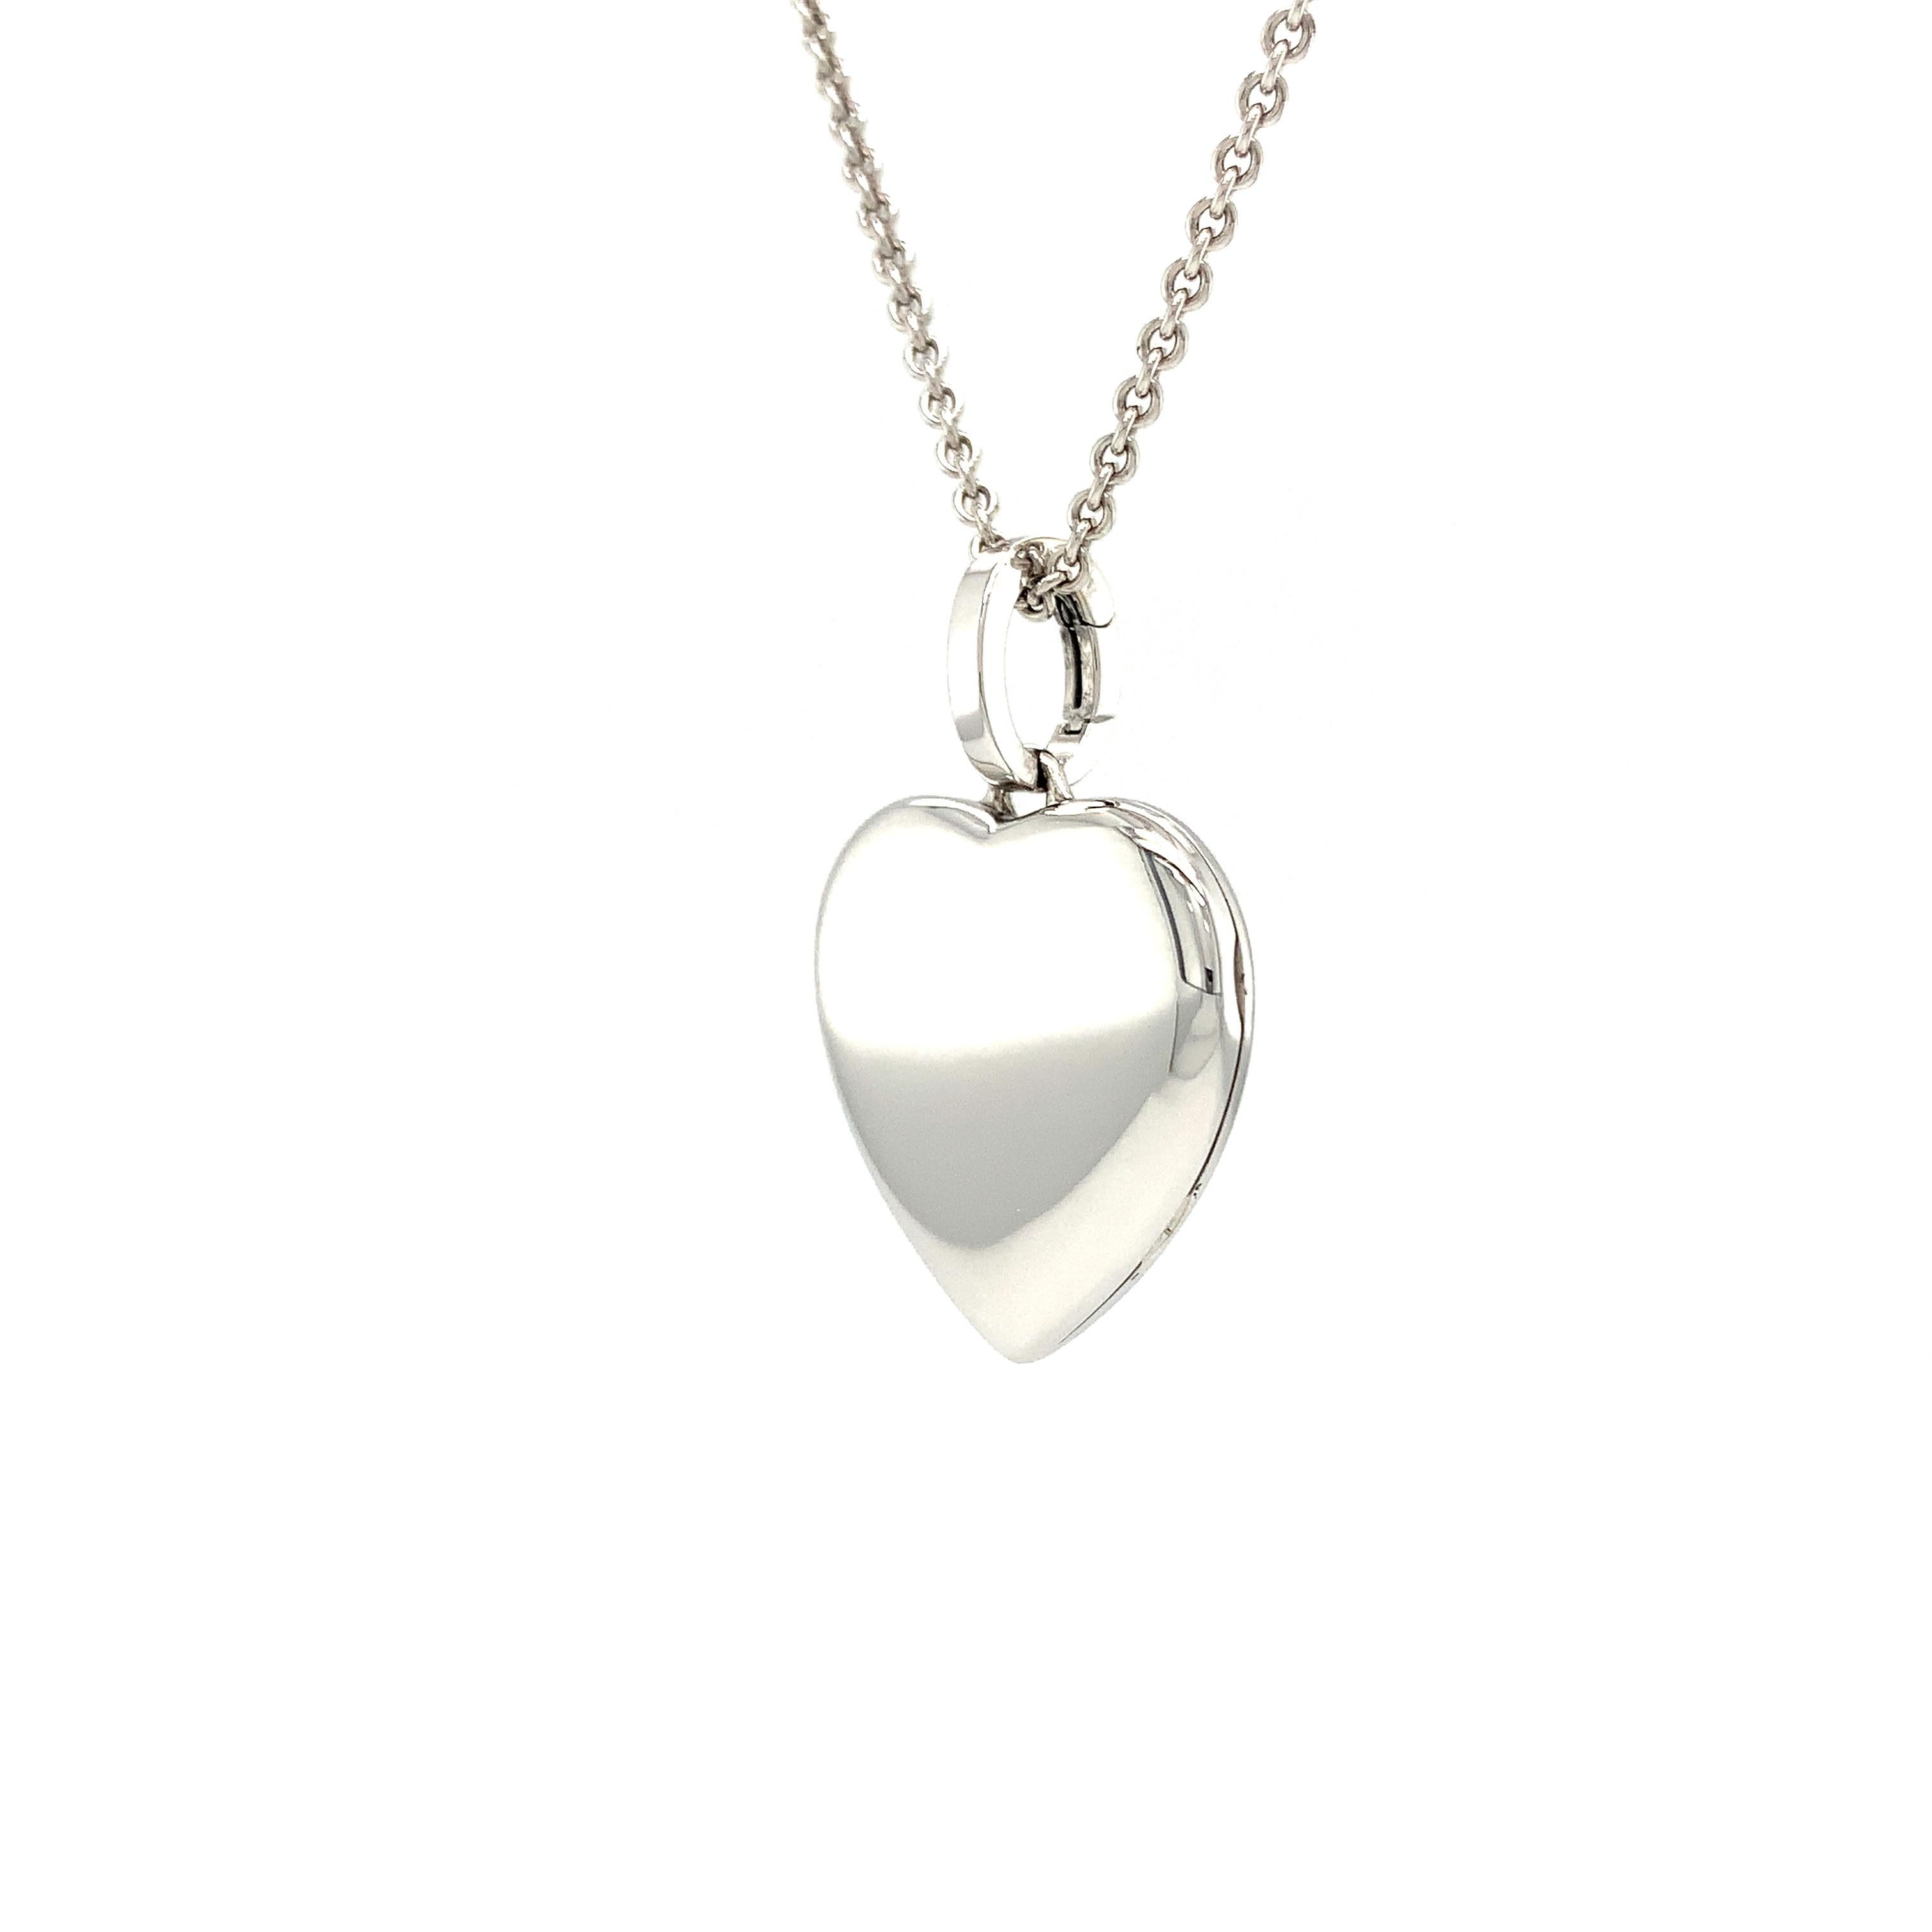 Victor Mayer customizable heart shaped locket pendant necklace, polished 18k white gold, Hallmark collection, measurements app. 23.0 mm x 25.0 mm

About the creator Victor Mayer
Victor Mayer is internationally renowned for elegant timeless designs